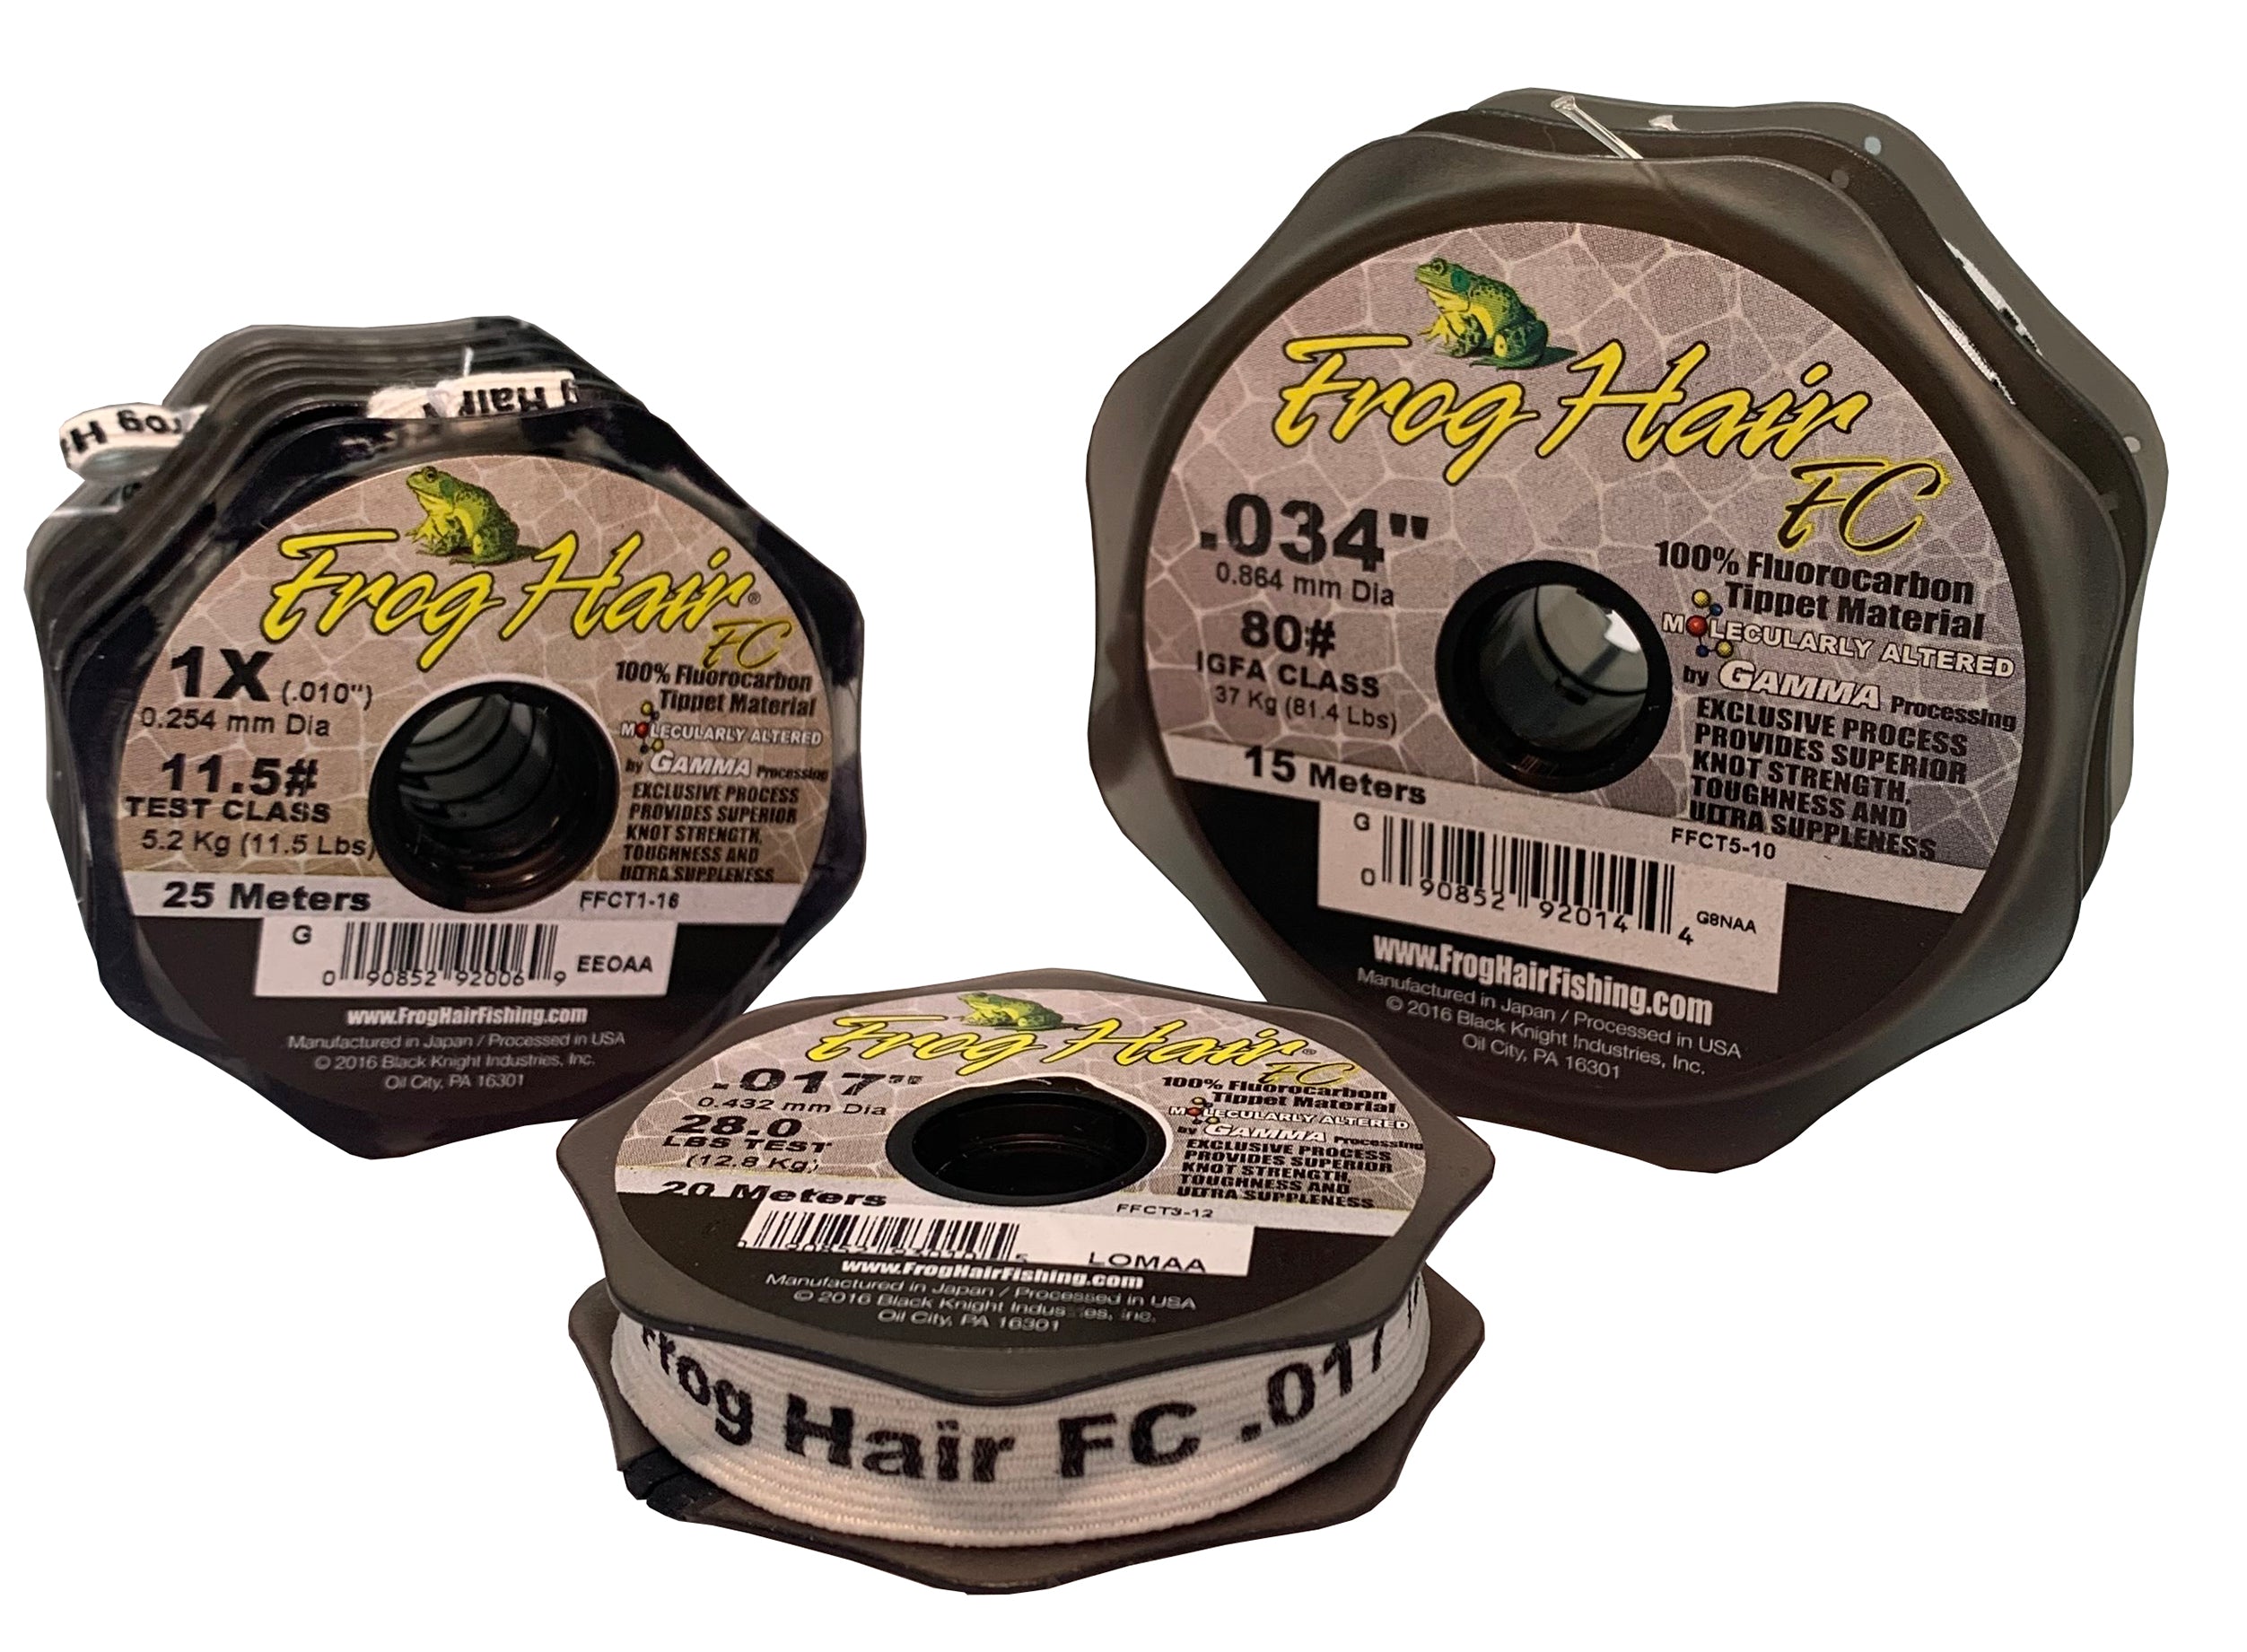 Fluorocarbon Guide Spool – froghairfishing